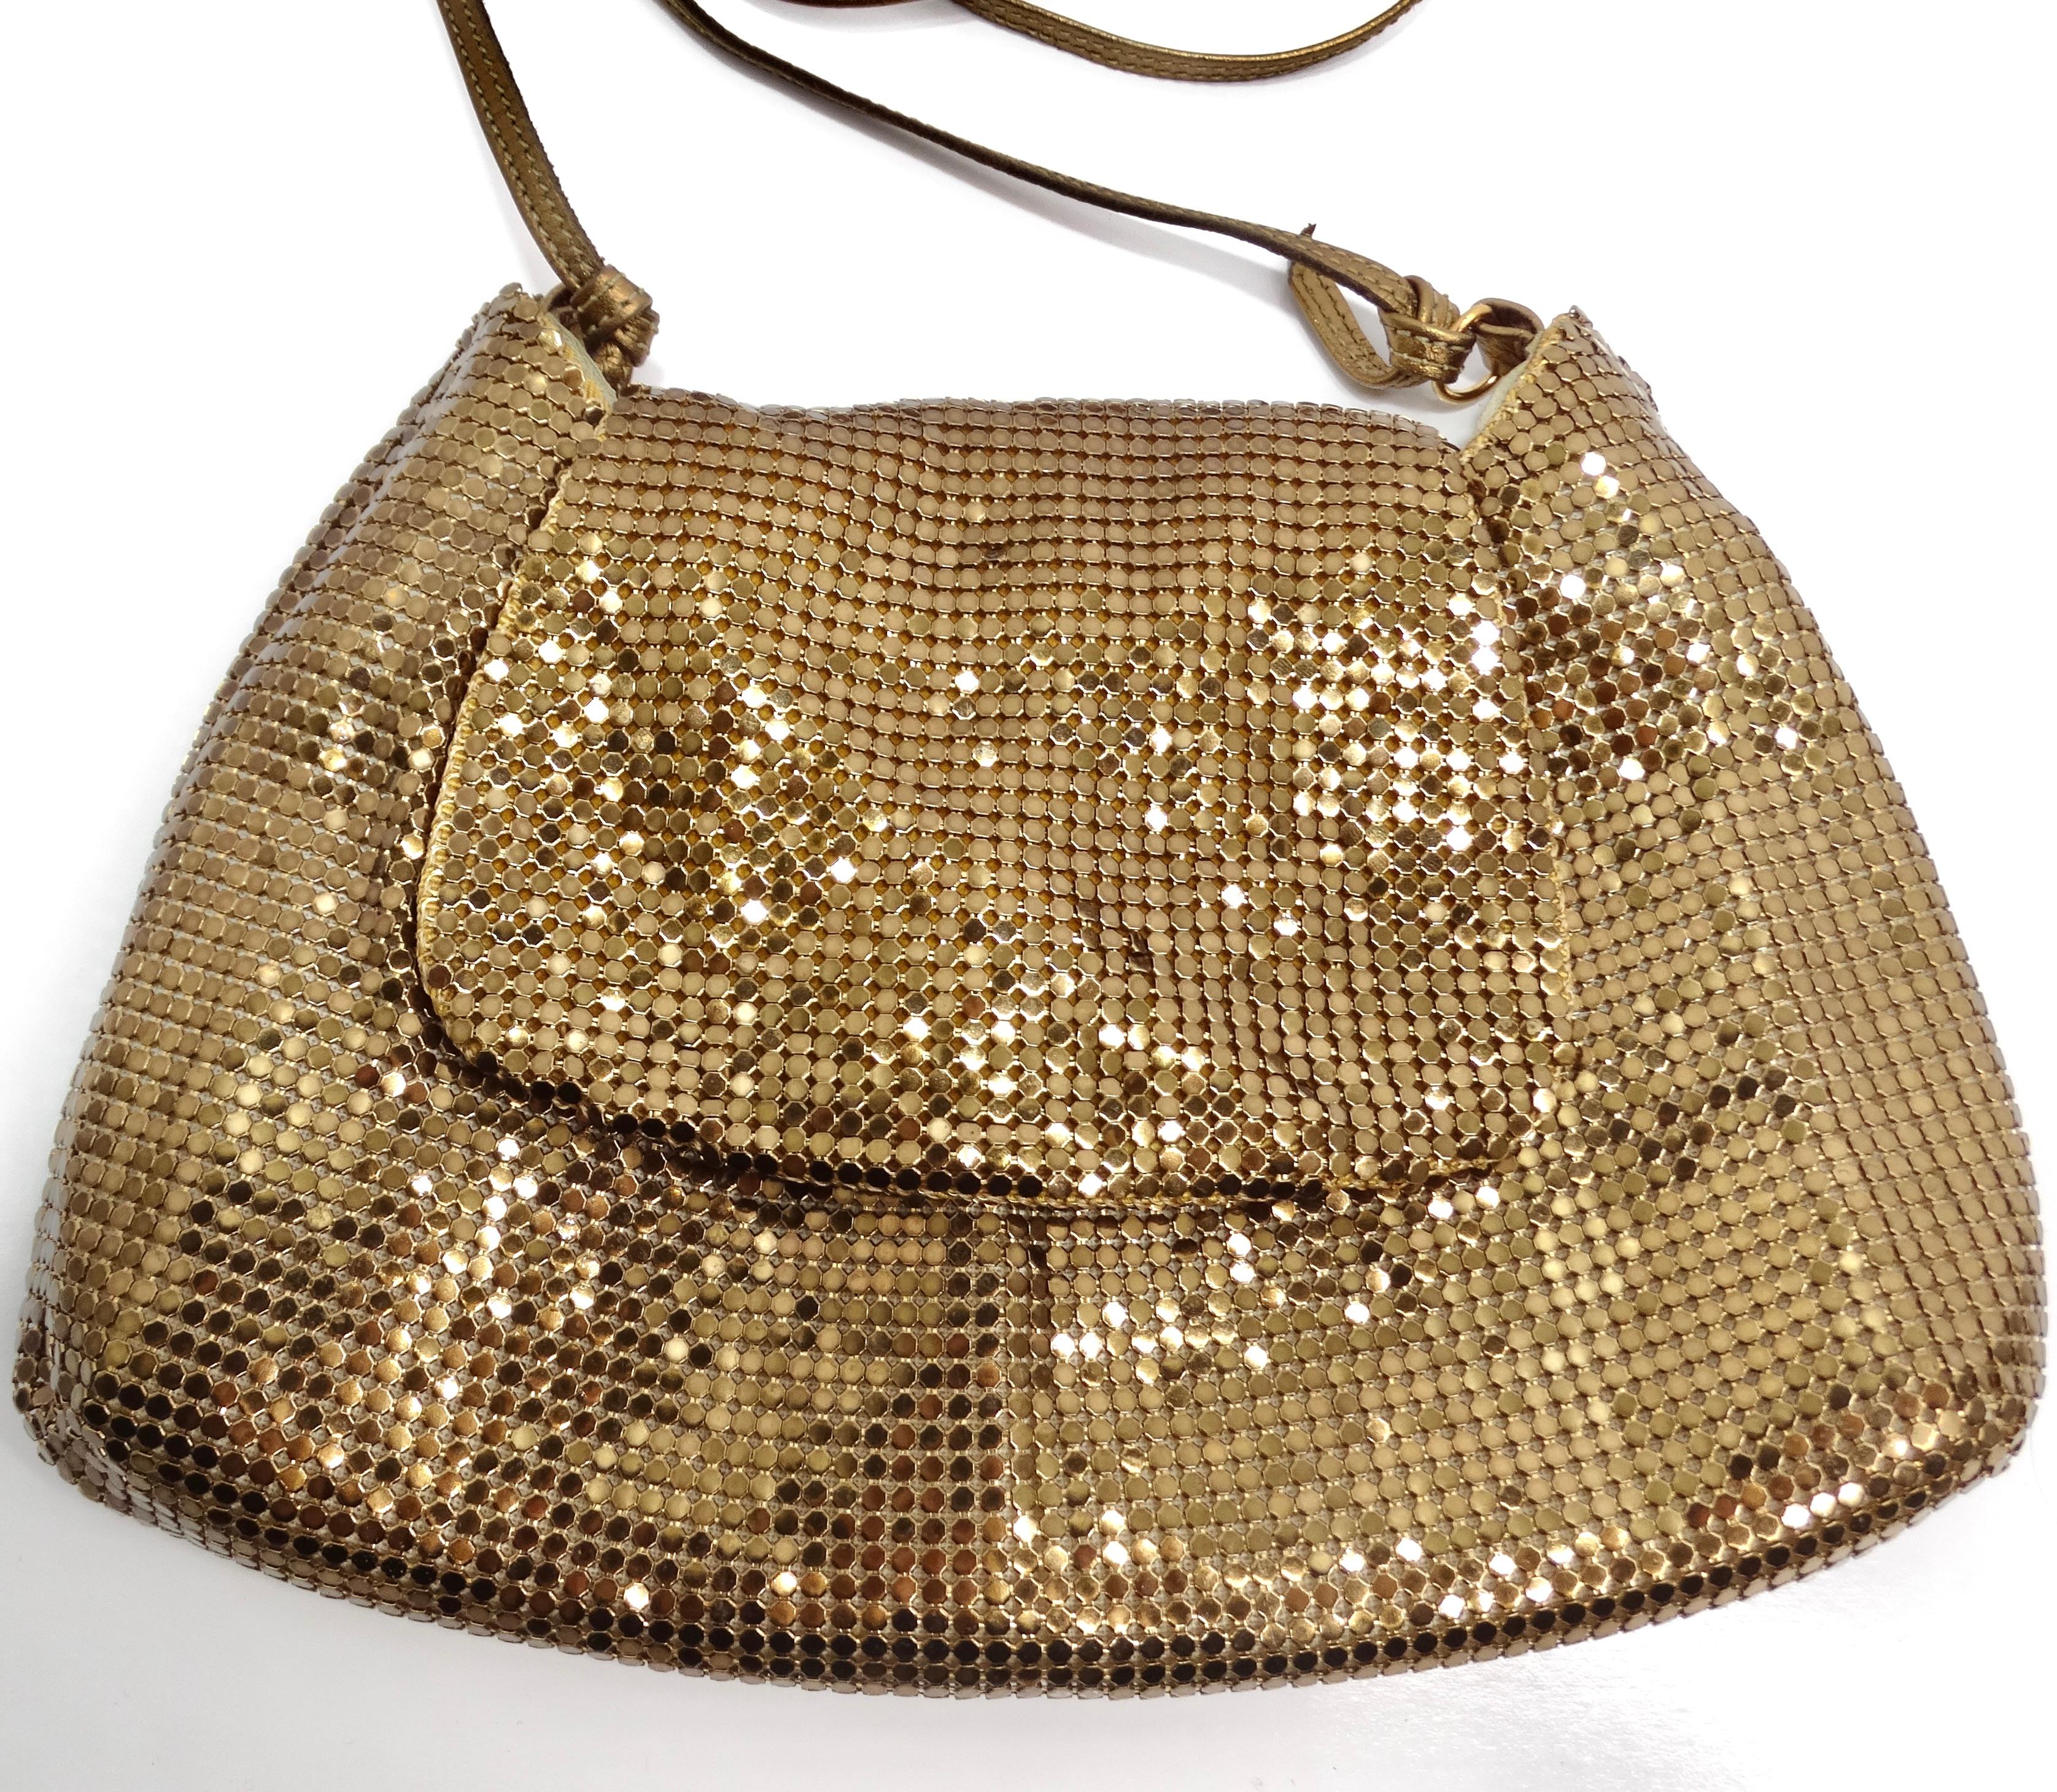 Elevate your style with the Whiting & Davis Gold Tone Chain Mail Crossbody Bag, a timeless and glamorous accessory that exudes vintage-inspired charm. Crafted from stunning gold-tone chain mail, this classic mini flap bag adds a touch of luxury and